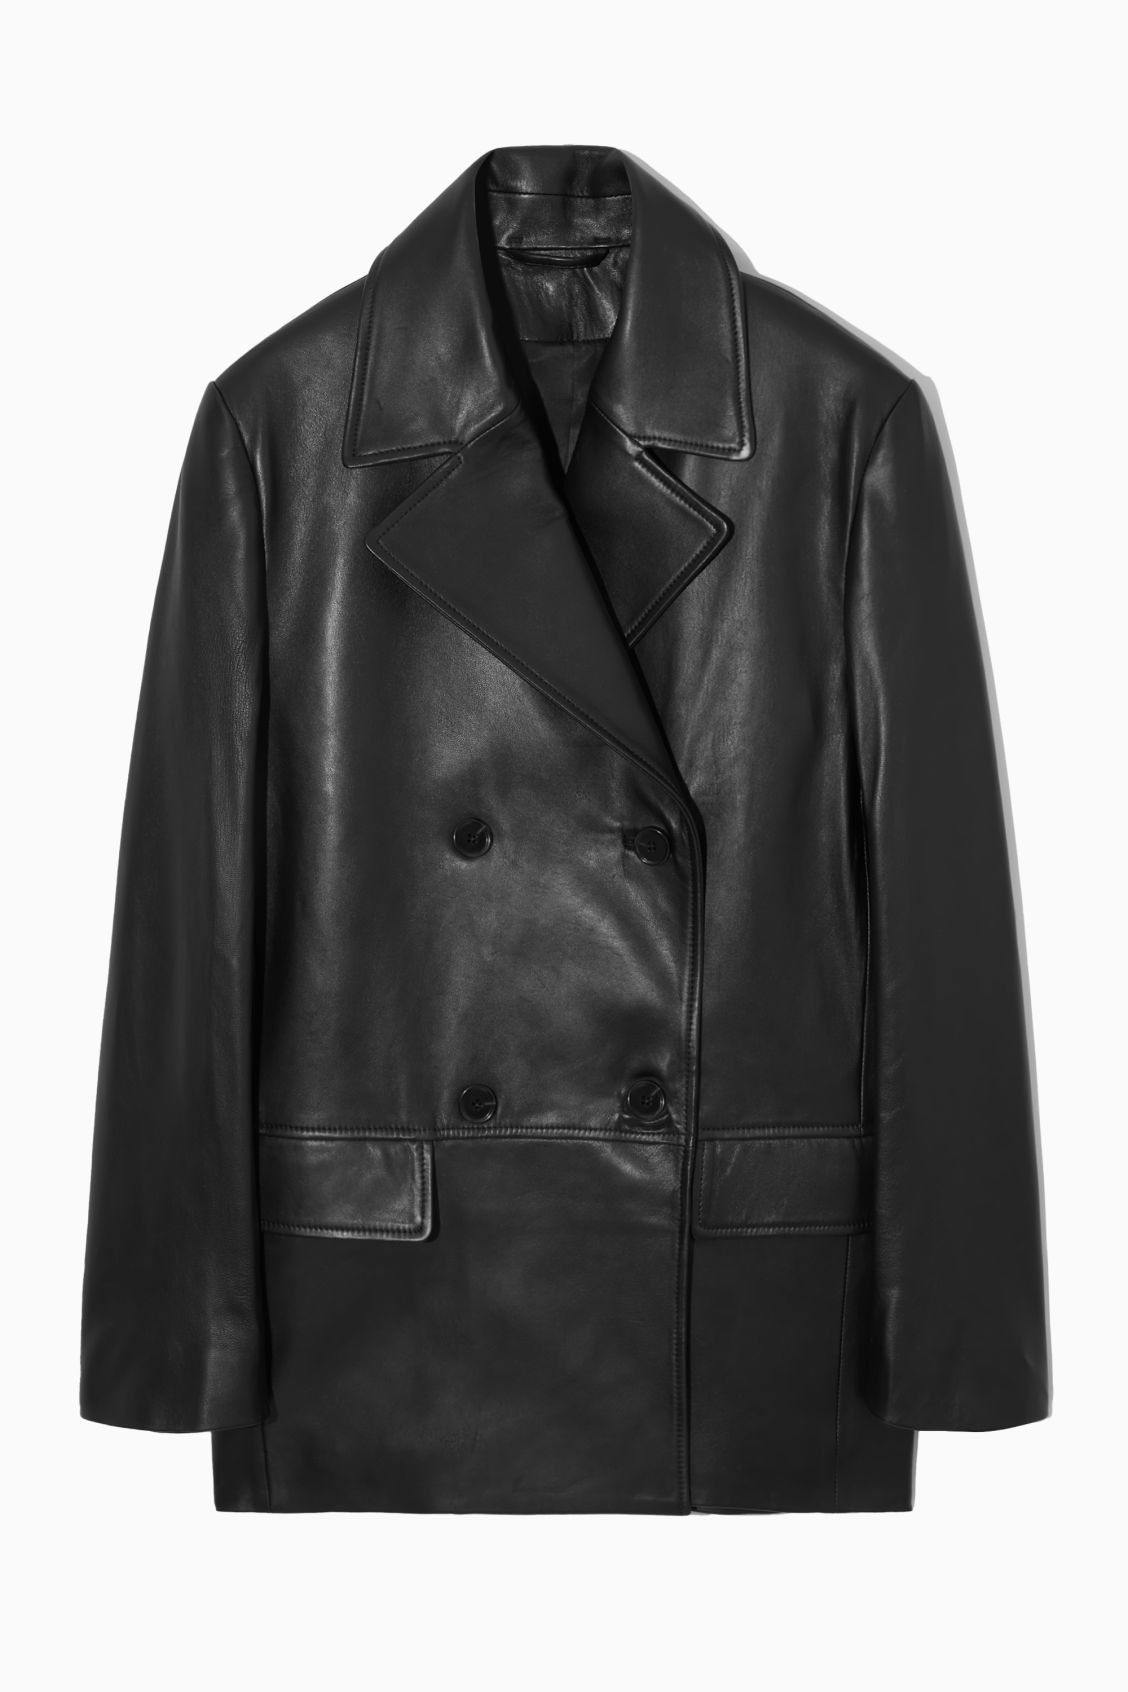 A black leather coat on a swinger Description automatically generated